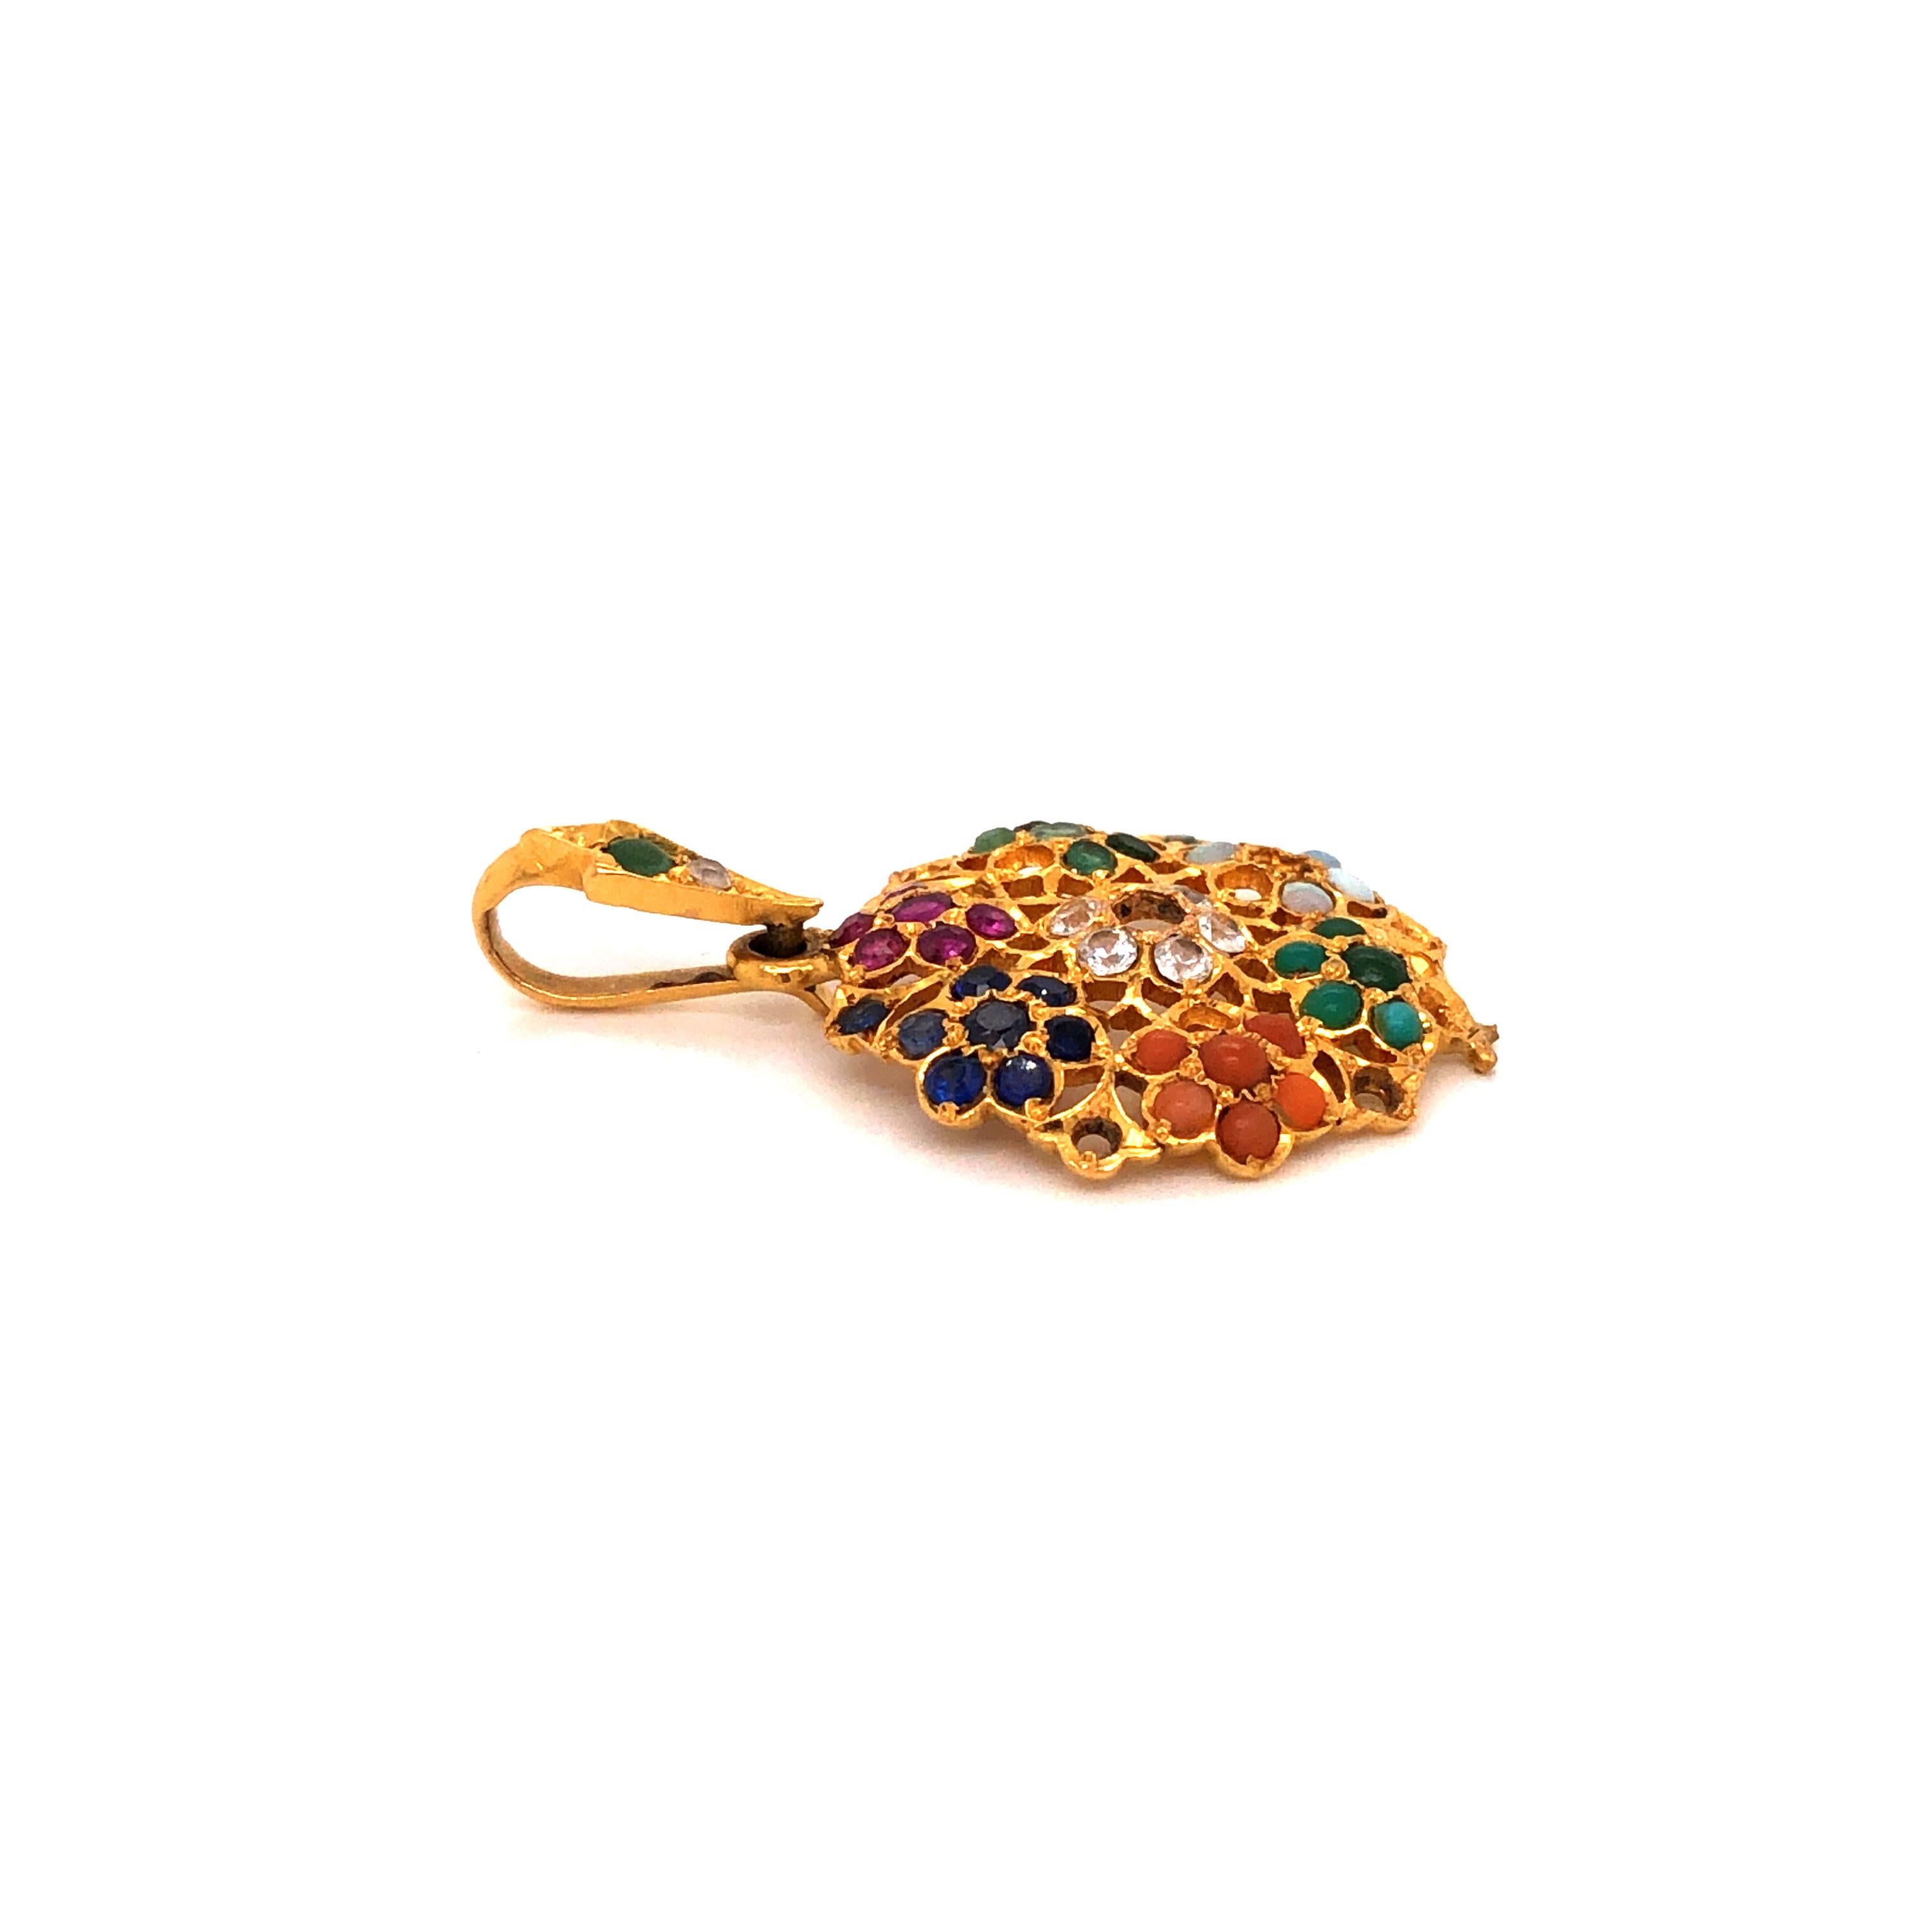 22K yellow gold pendant containing round emeralds, opals, rubies, blue and white sapphires, and turquoise.

Metal: 22K Yellow Gold

Size: 21mm x 34mm

Total Weight: 3.6 grams